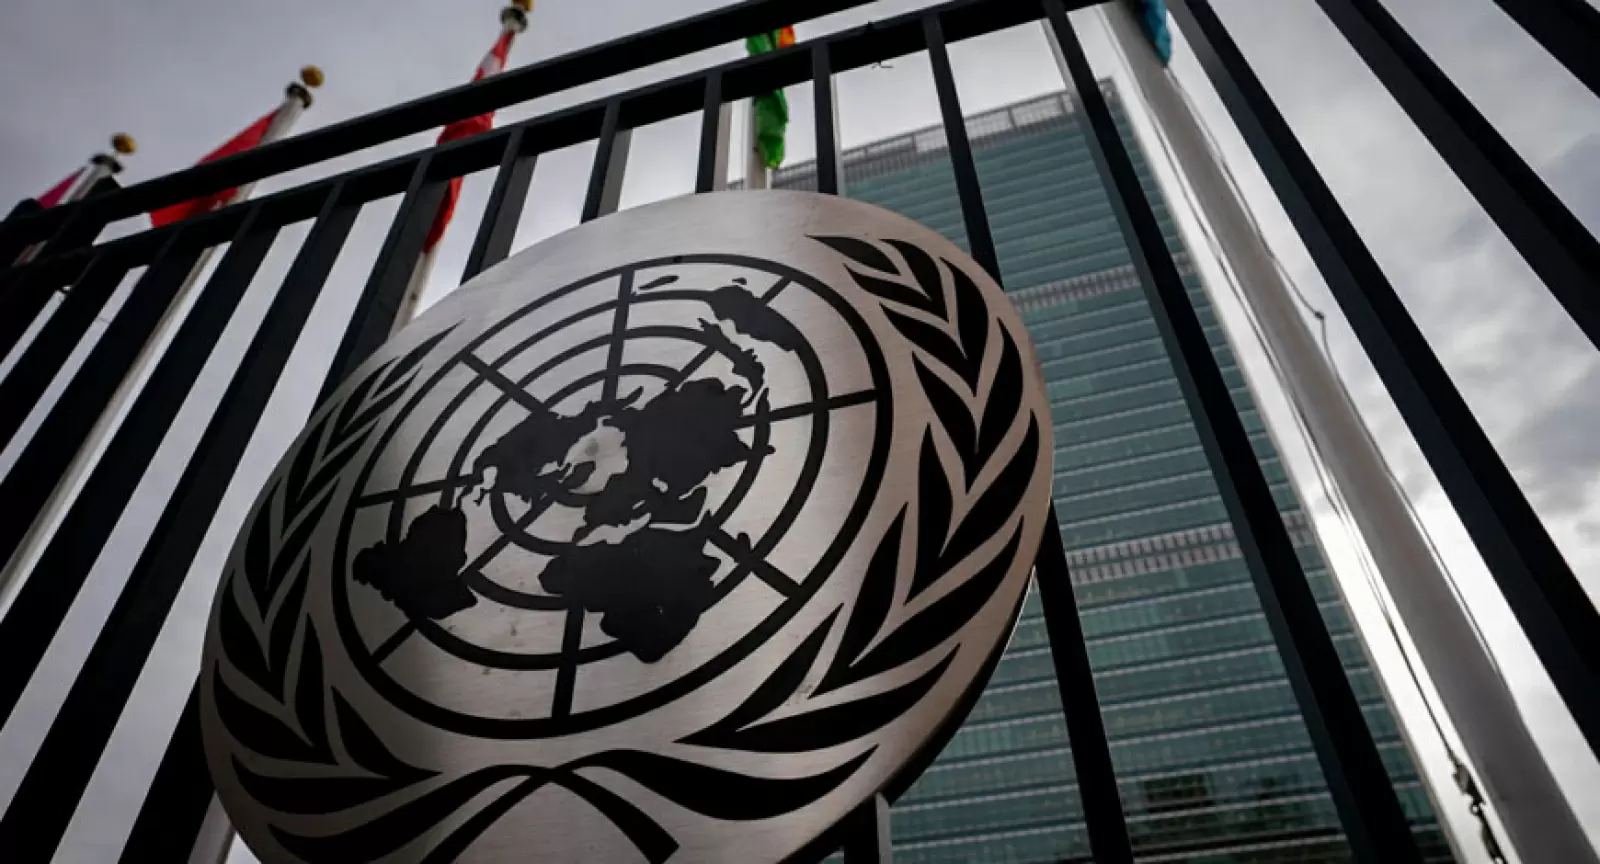 UN AI Resolution: United Nations approves the use of AI, global rules set for new technology